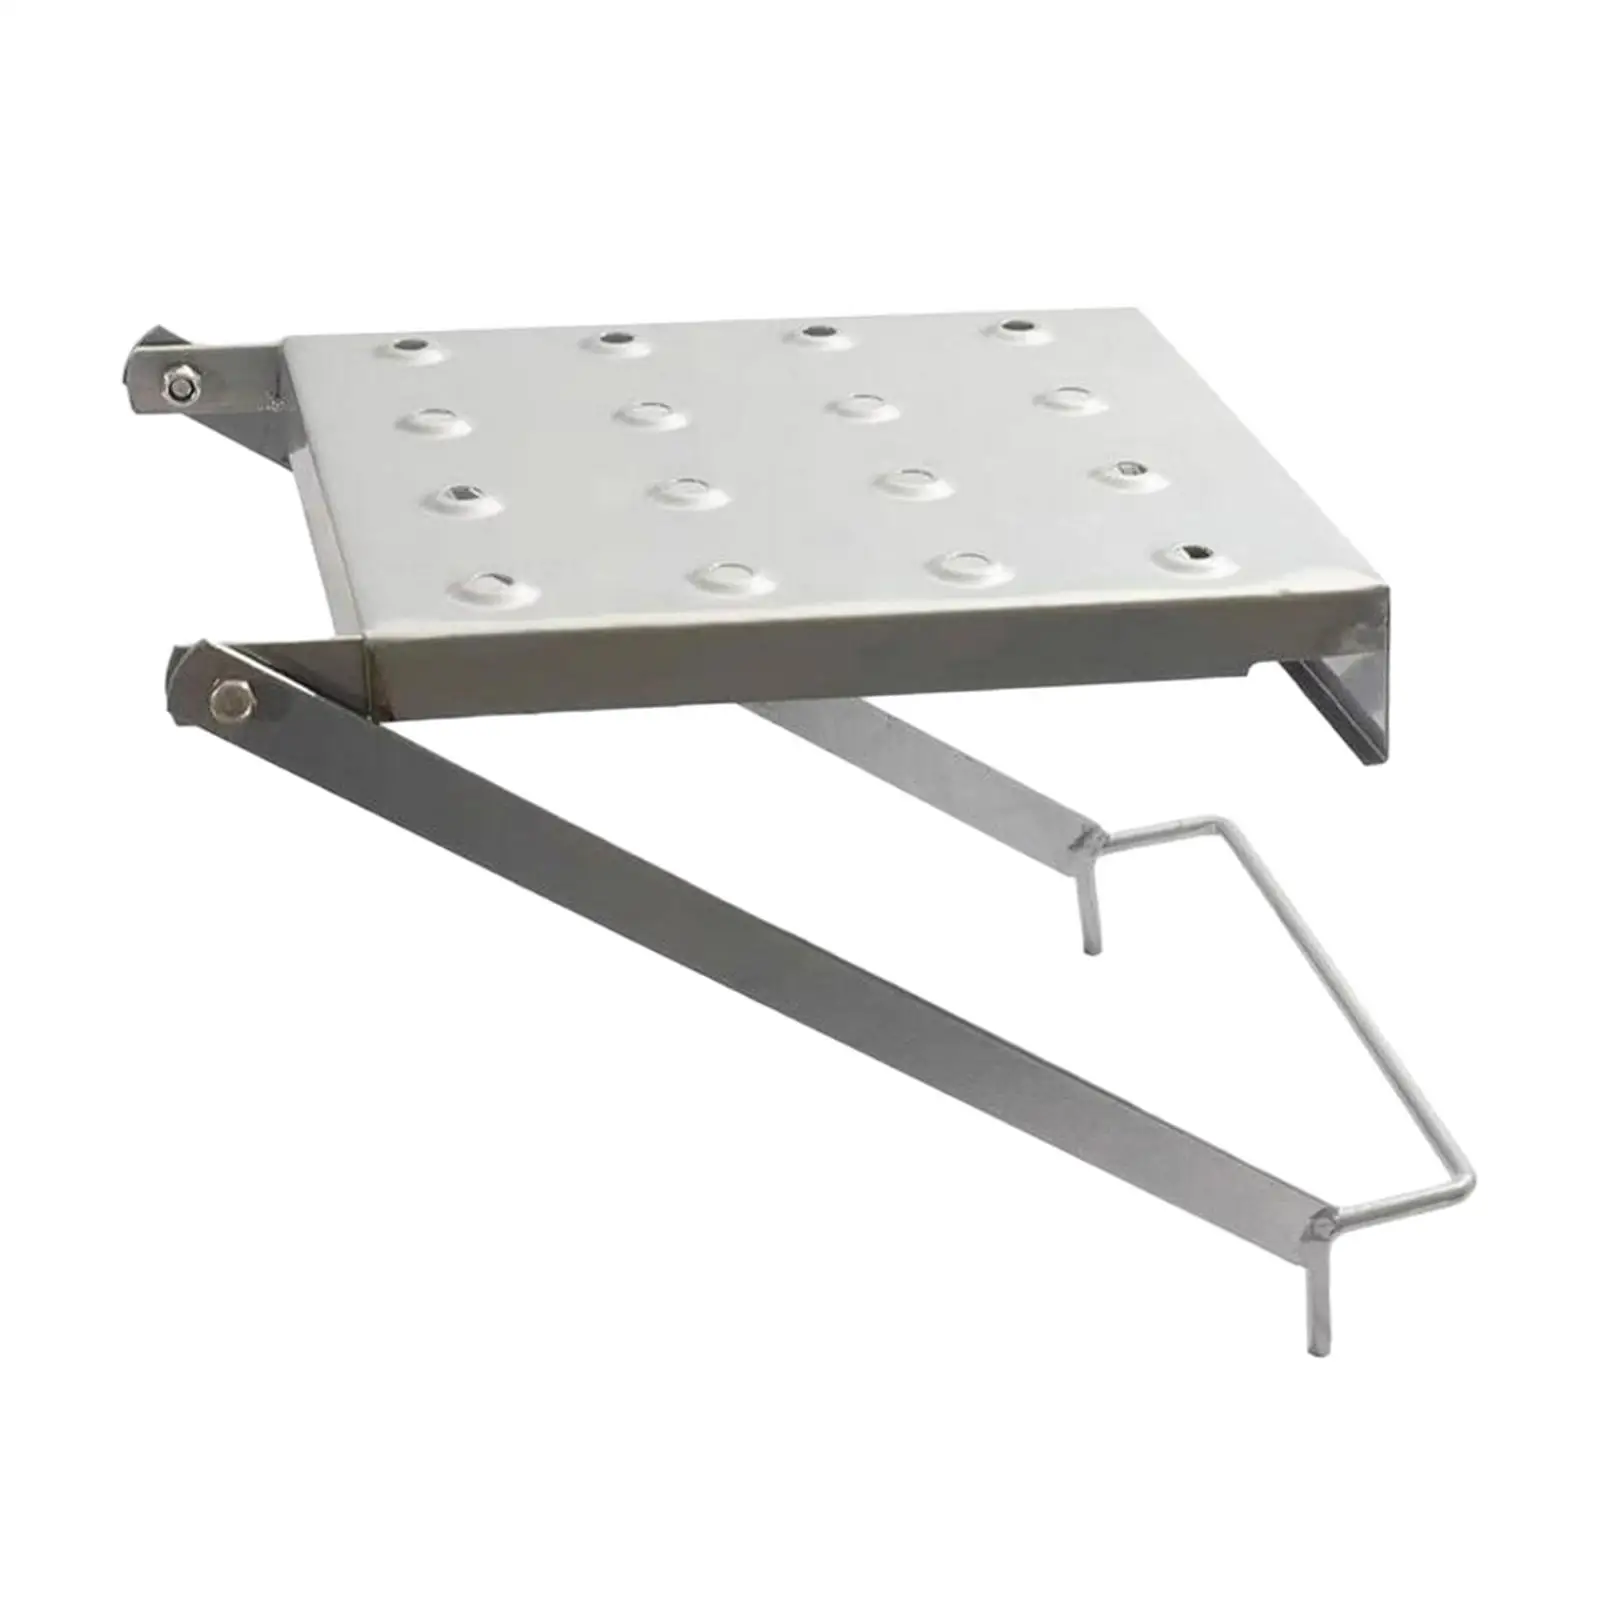 Ladder Work Platform Work Ladder Tray Strong Bearing Capacity Multifunction Stable for Pantry Kitchen Household Painters